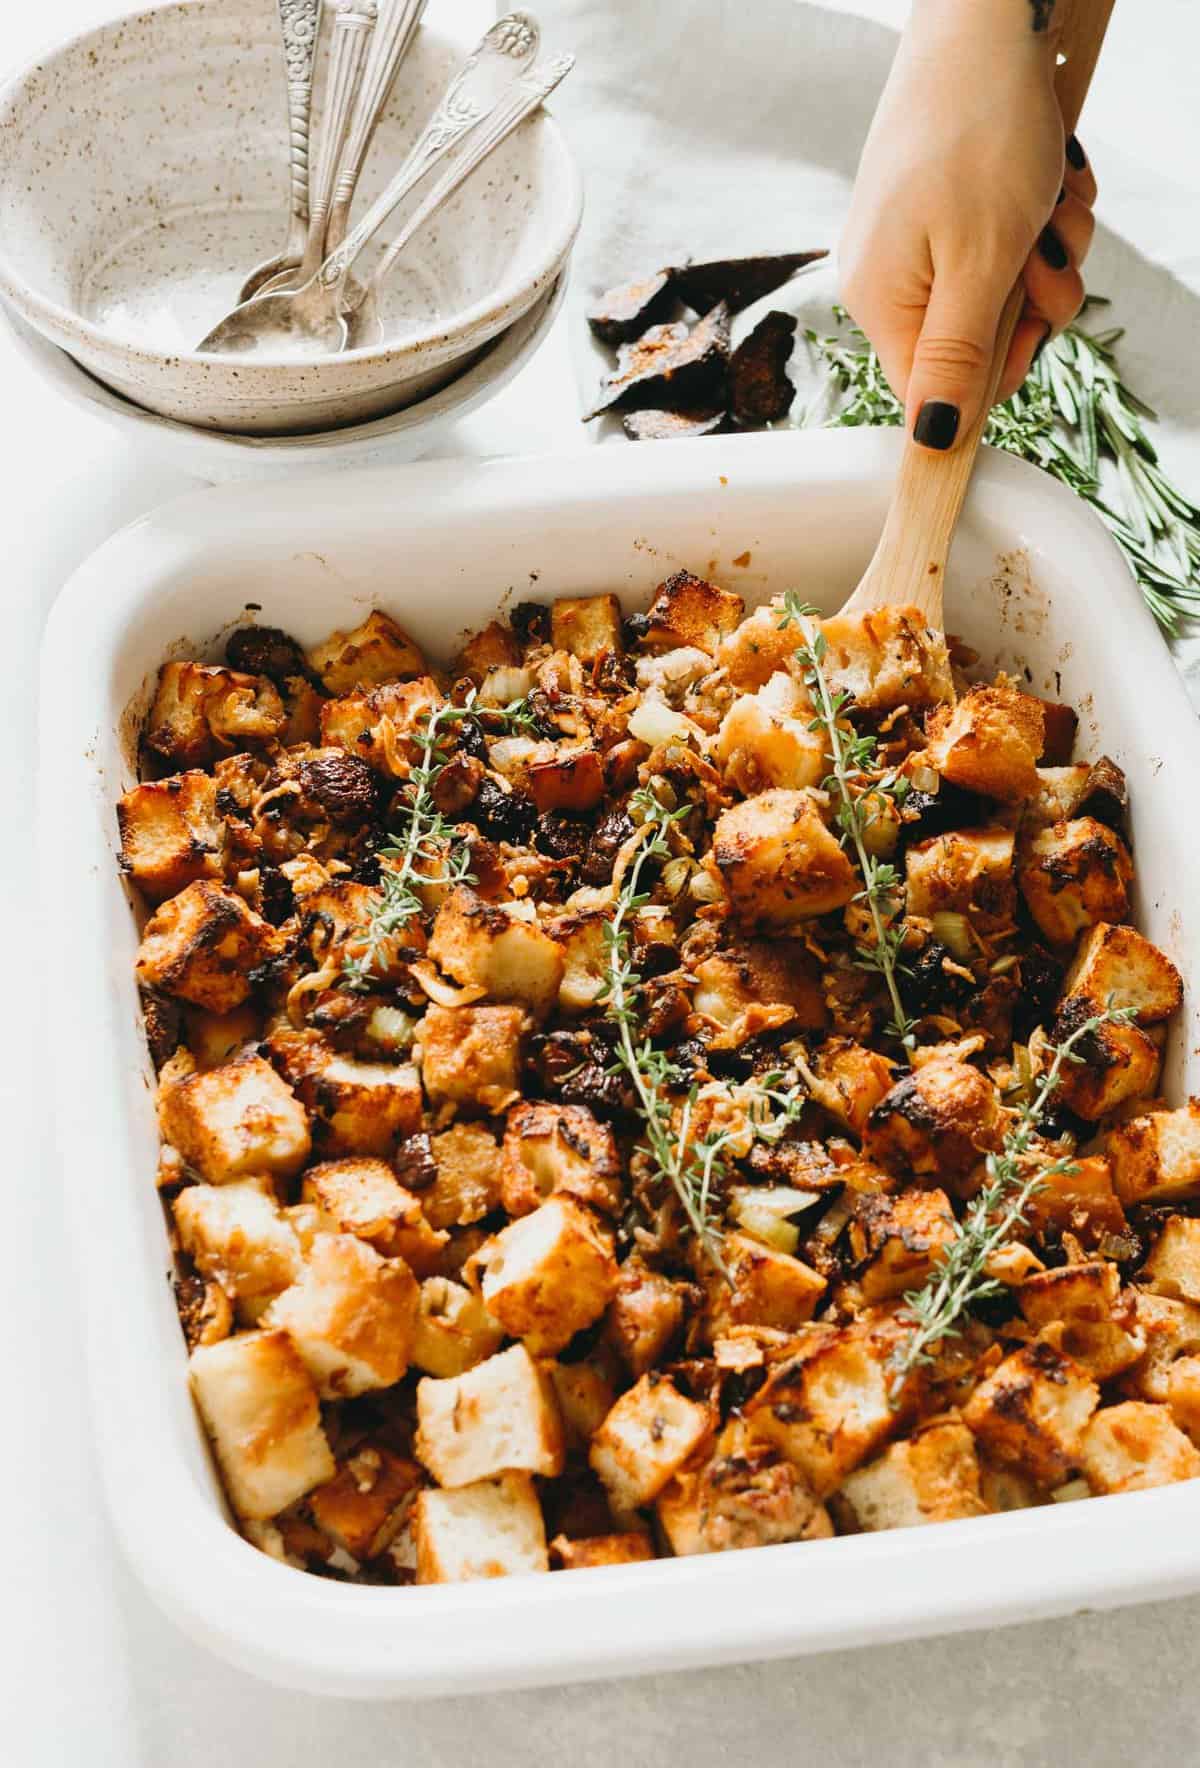 A unique take on the traditional Thanksgiving stuffing! This focaccia stuffing is filled with dried figs and chicken sausage for sweet and savory flavors!